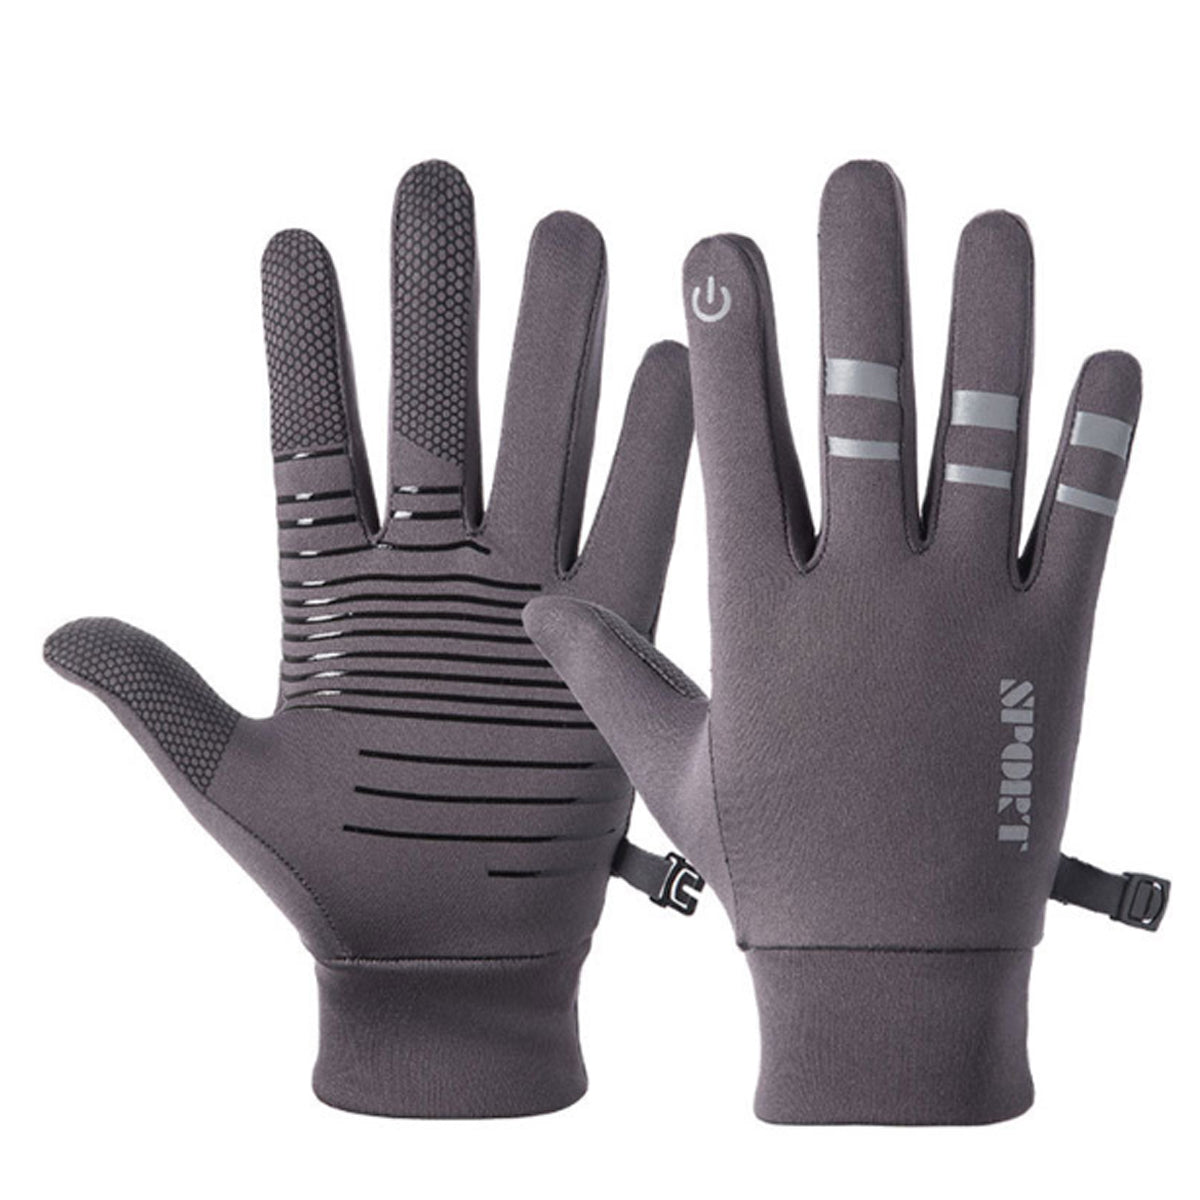 Dim Gray Winter Cycling Warm Windproof Waterproof Anti slip Thermal Touch Screen Gloves